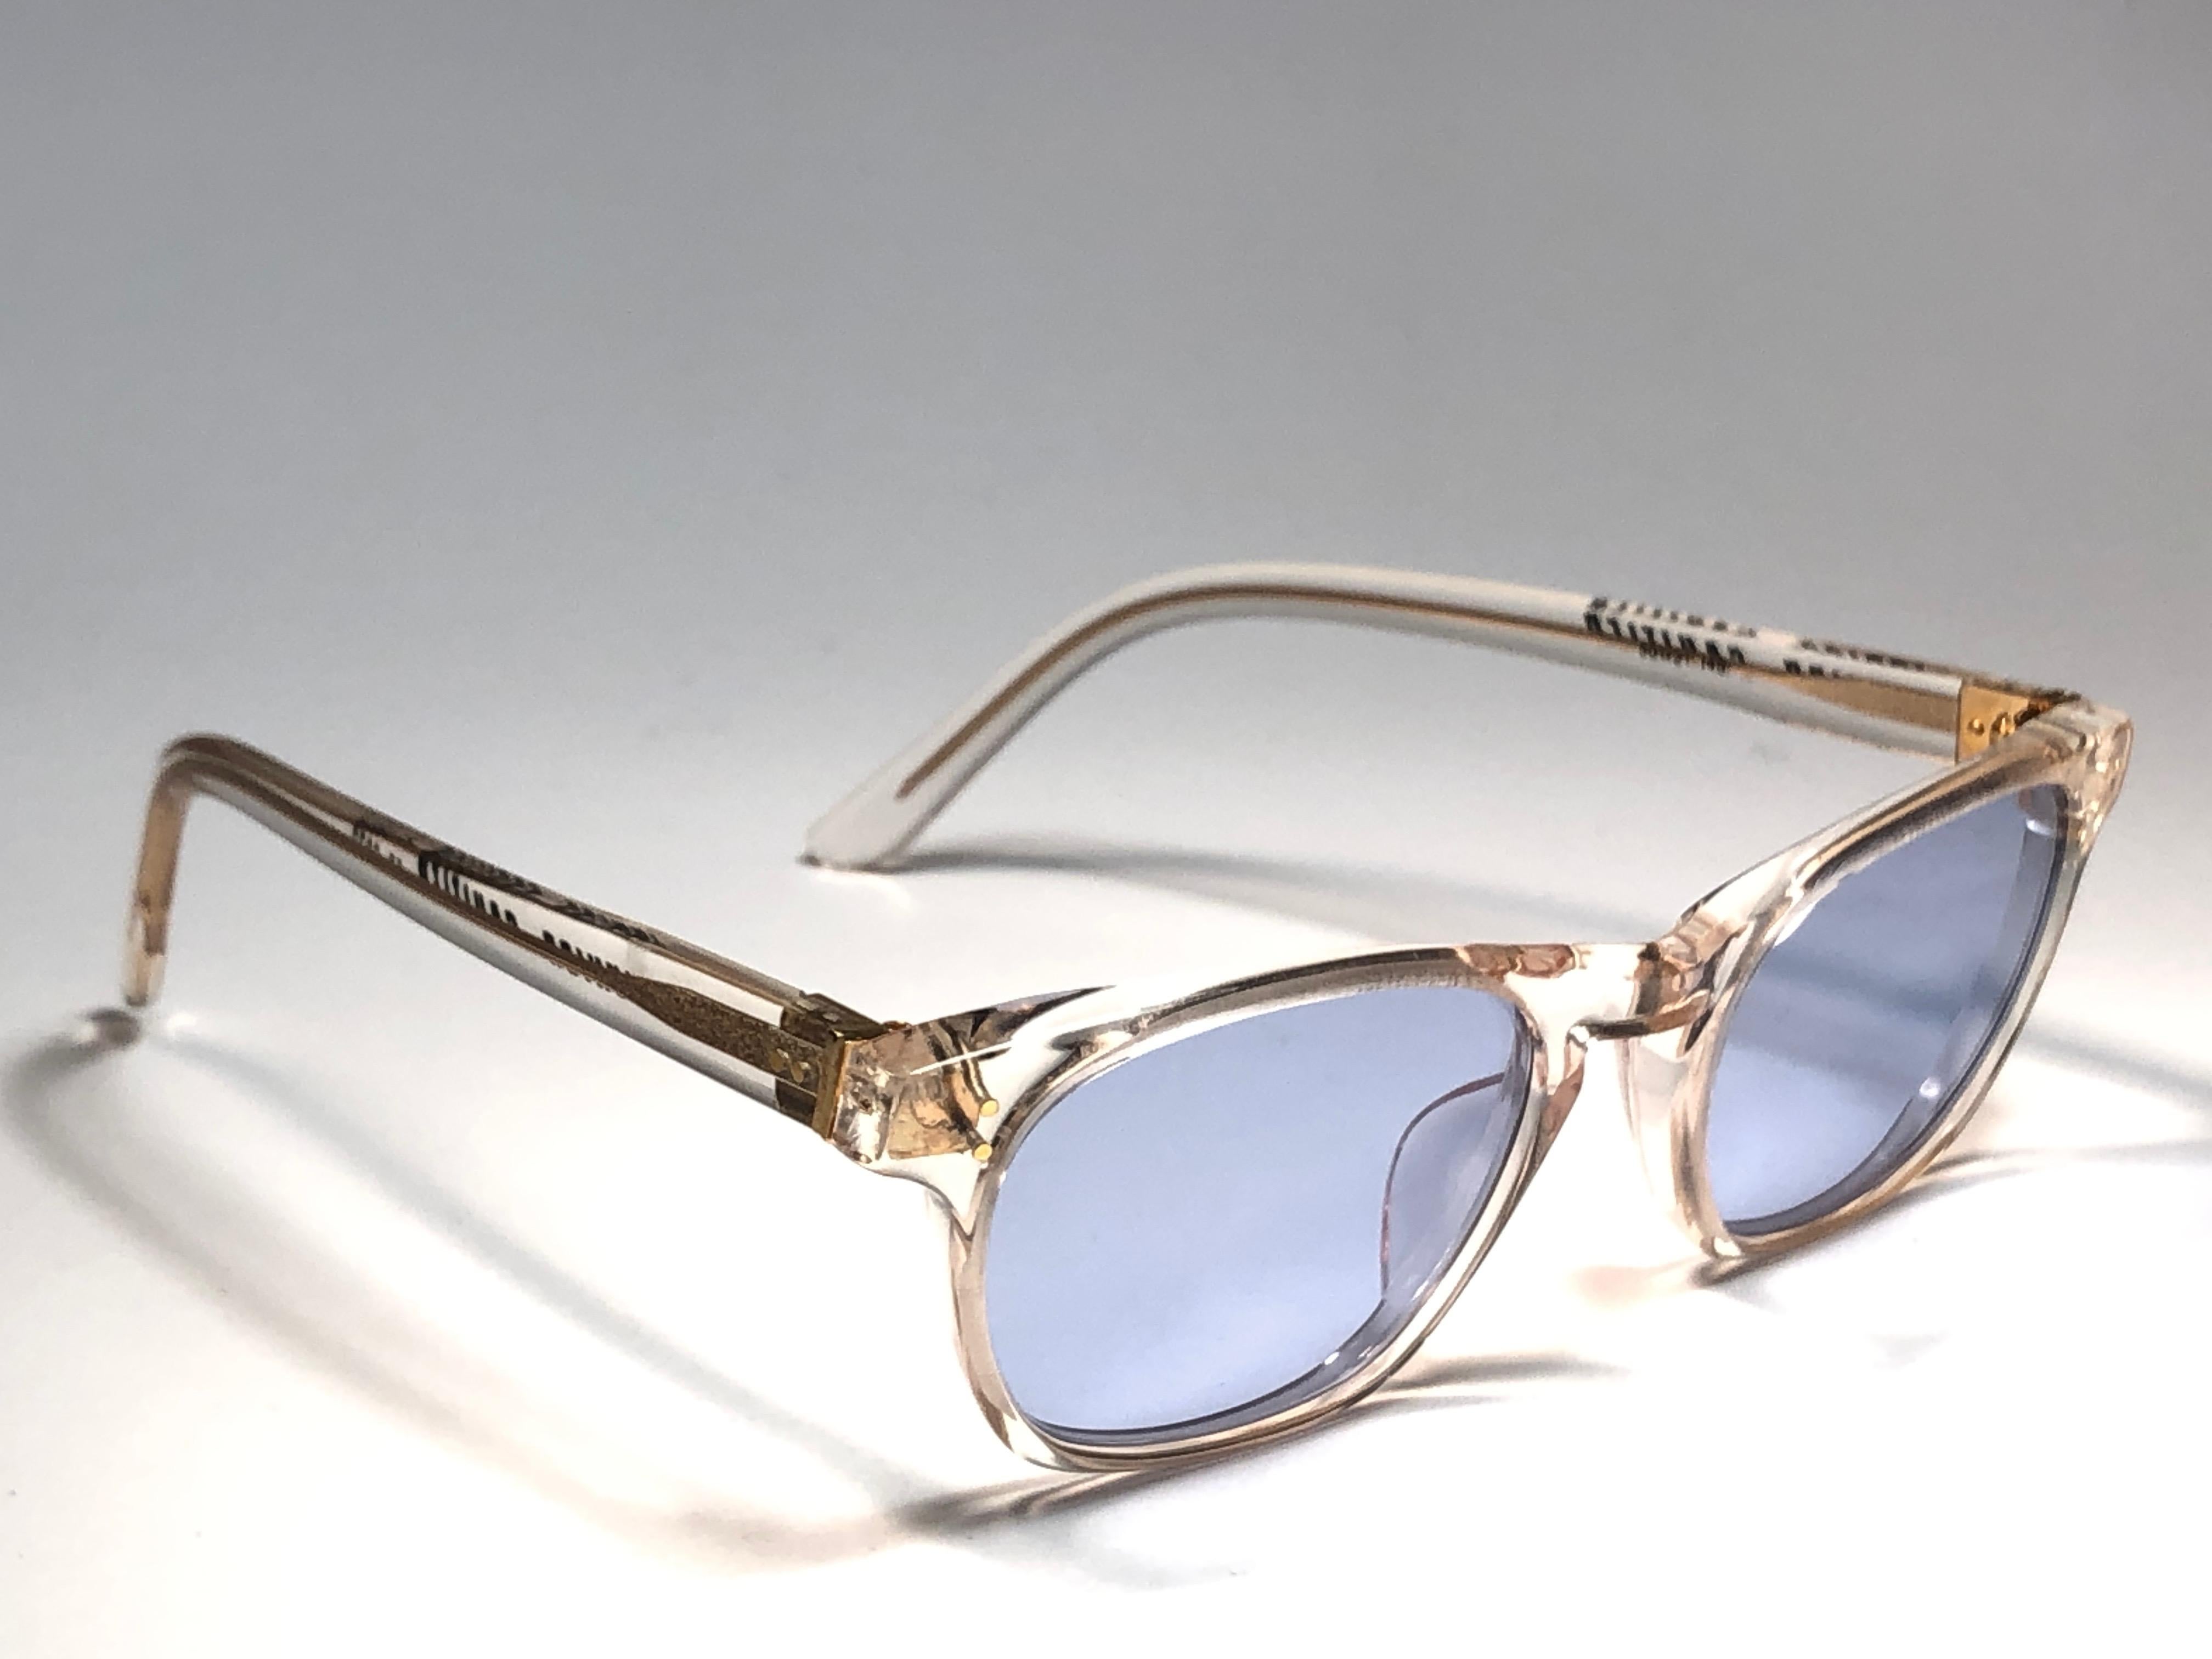 New Jean Paul Gaultier Junior 57 0073  Translucent Sunglasses 1990 Japan  In New Condition For Sale In Baleares, Baleares